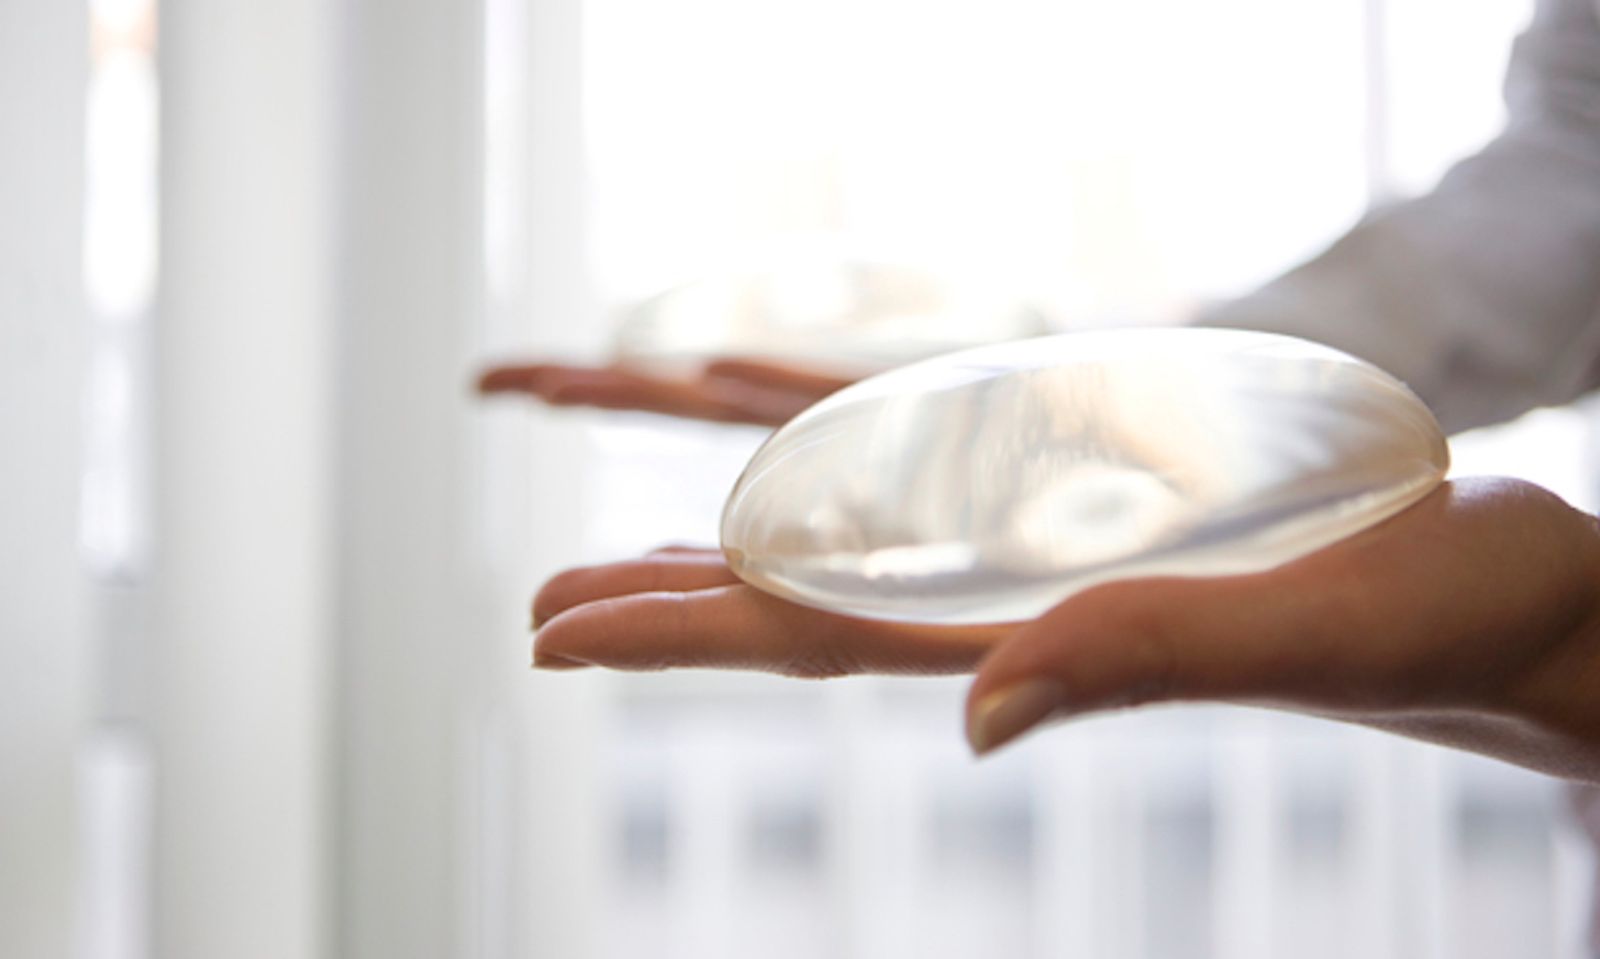 Textured Breast Implants Recalled Worldwide Due To Cancer Risk